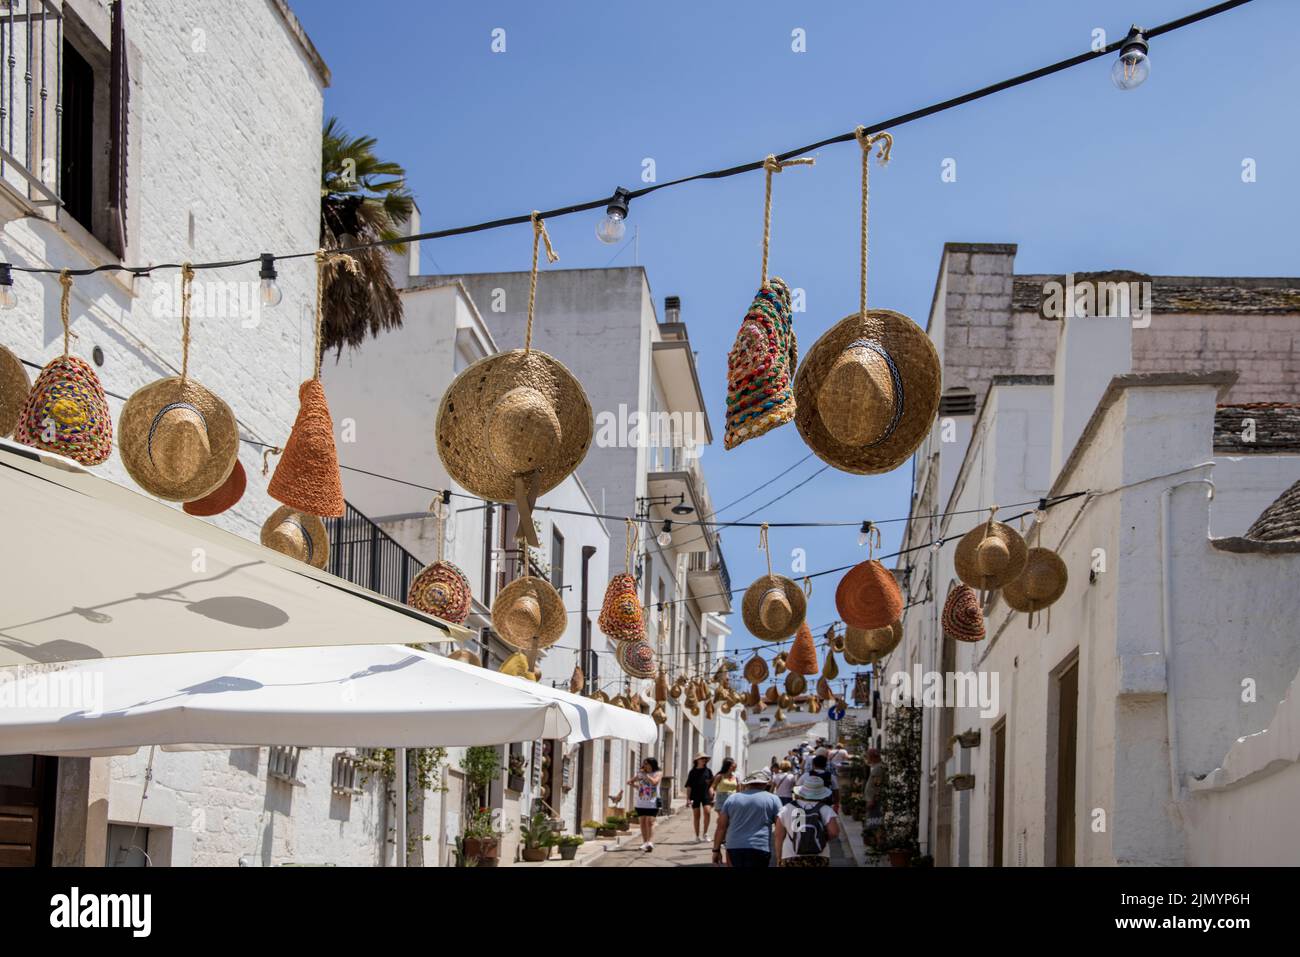 hats cover 0ne of the main streets in locorotondo a town in puglia italy famous for its circular cone shaped  trulli houses Stock Photo